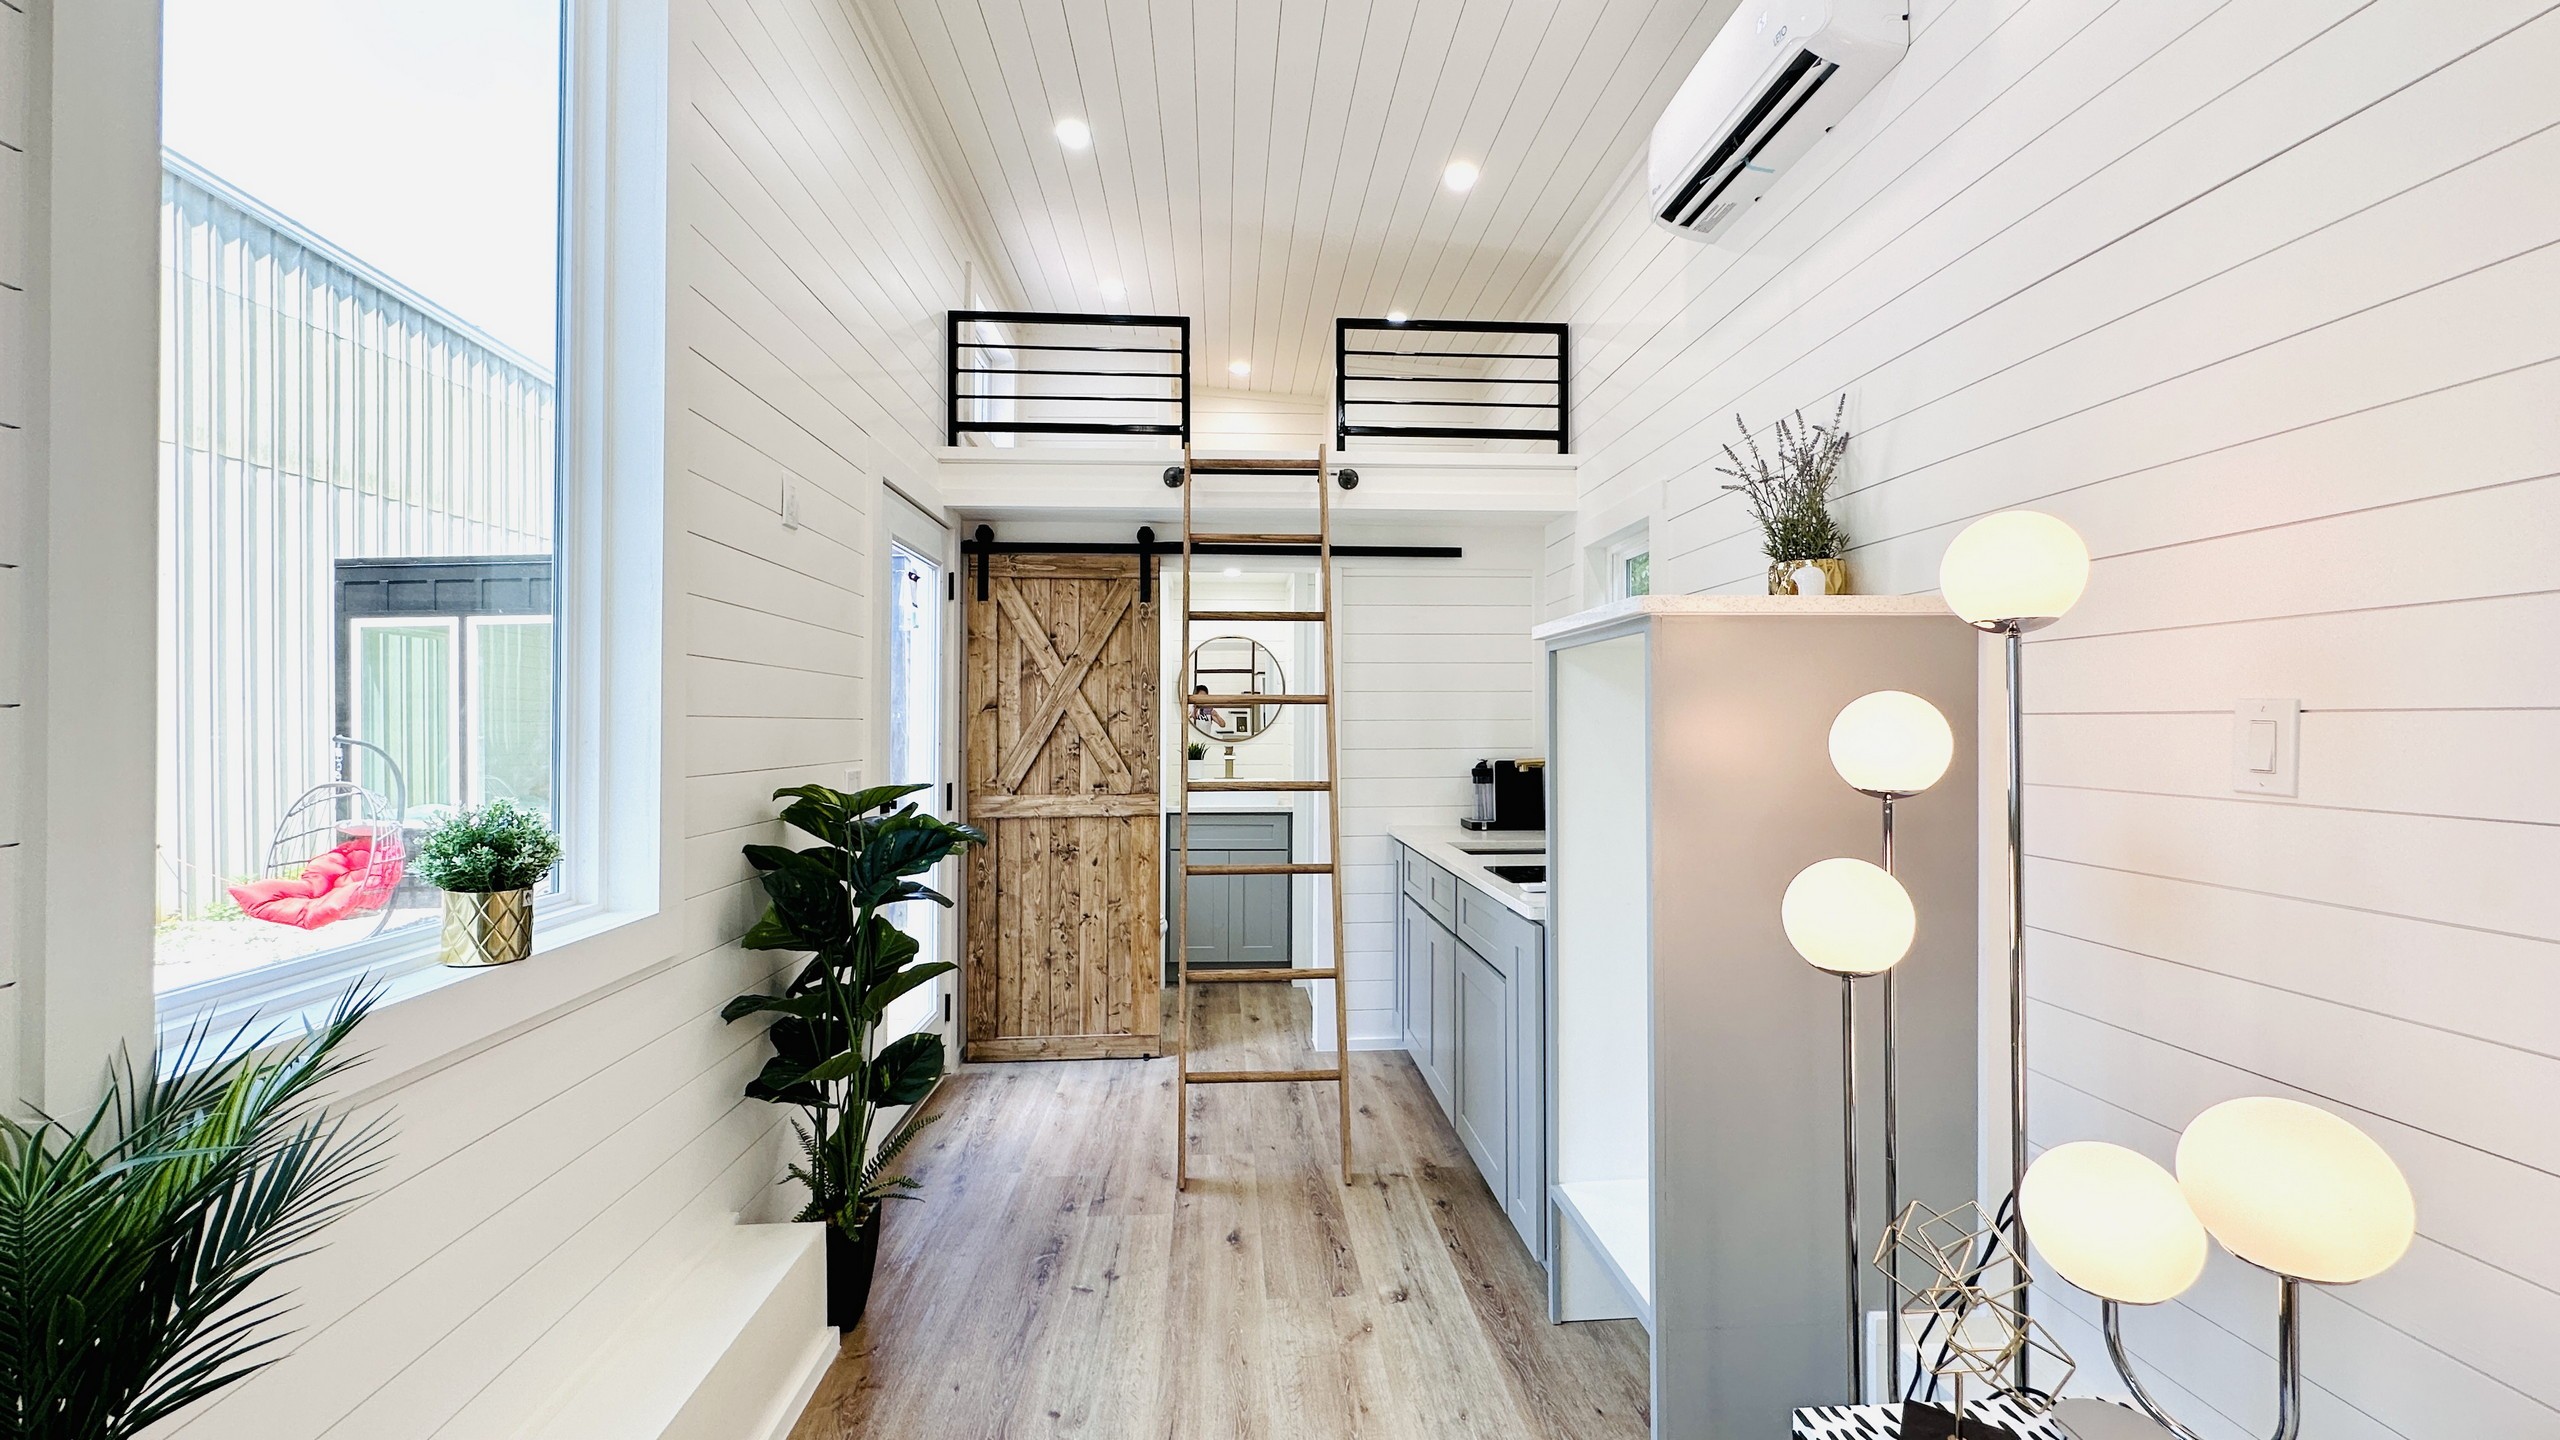 https://s1.cdn.autoevolution.com/images/news/gallery/try-not-to-fall-in-love-with-this-expertly-styled-luxury-tiny-home_6.jpg